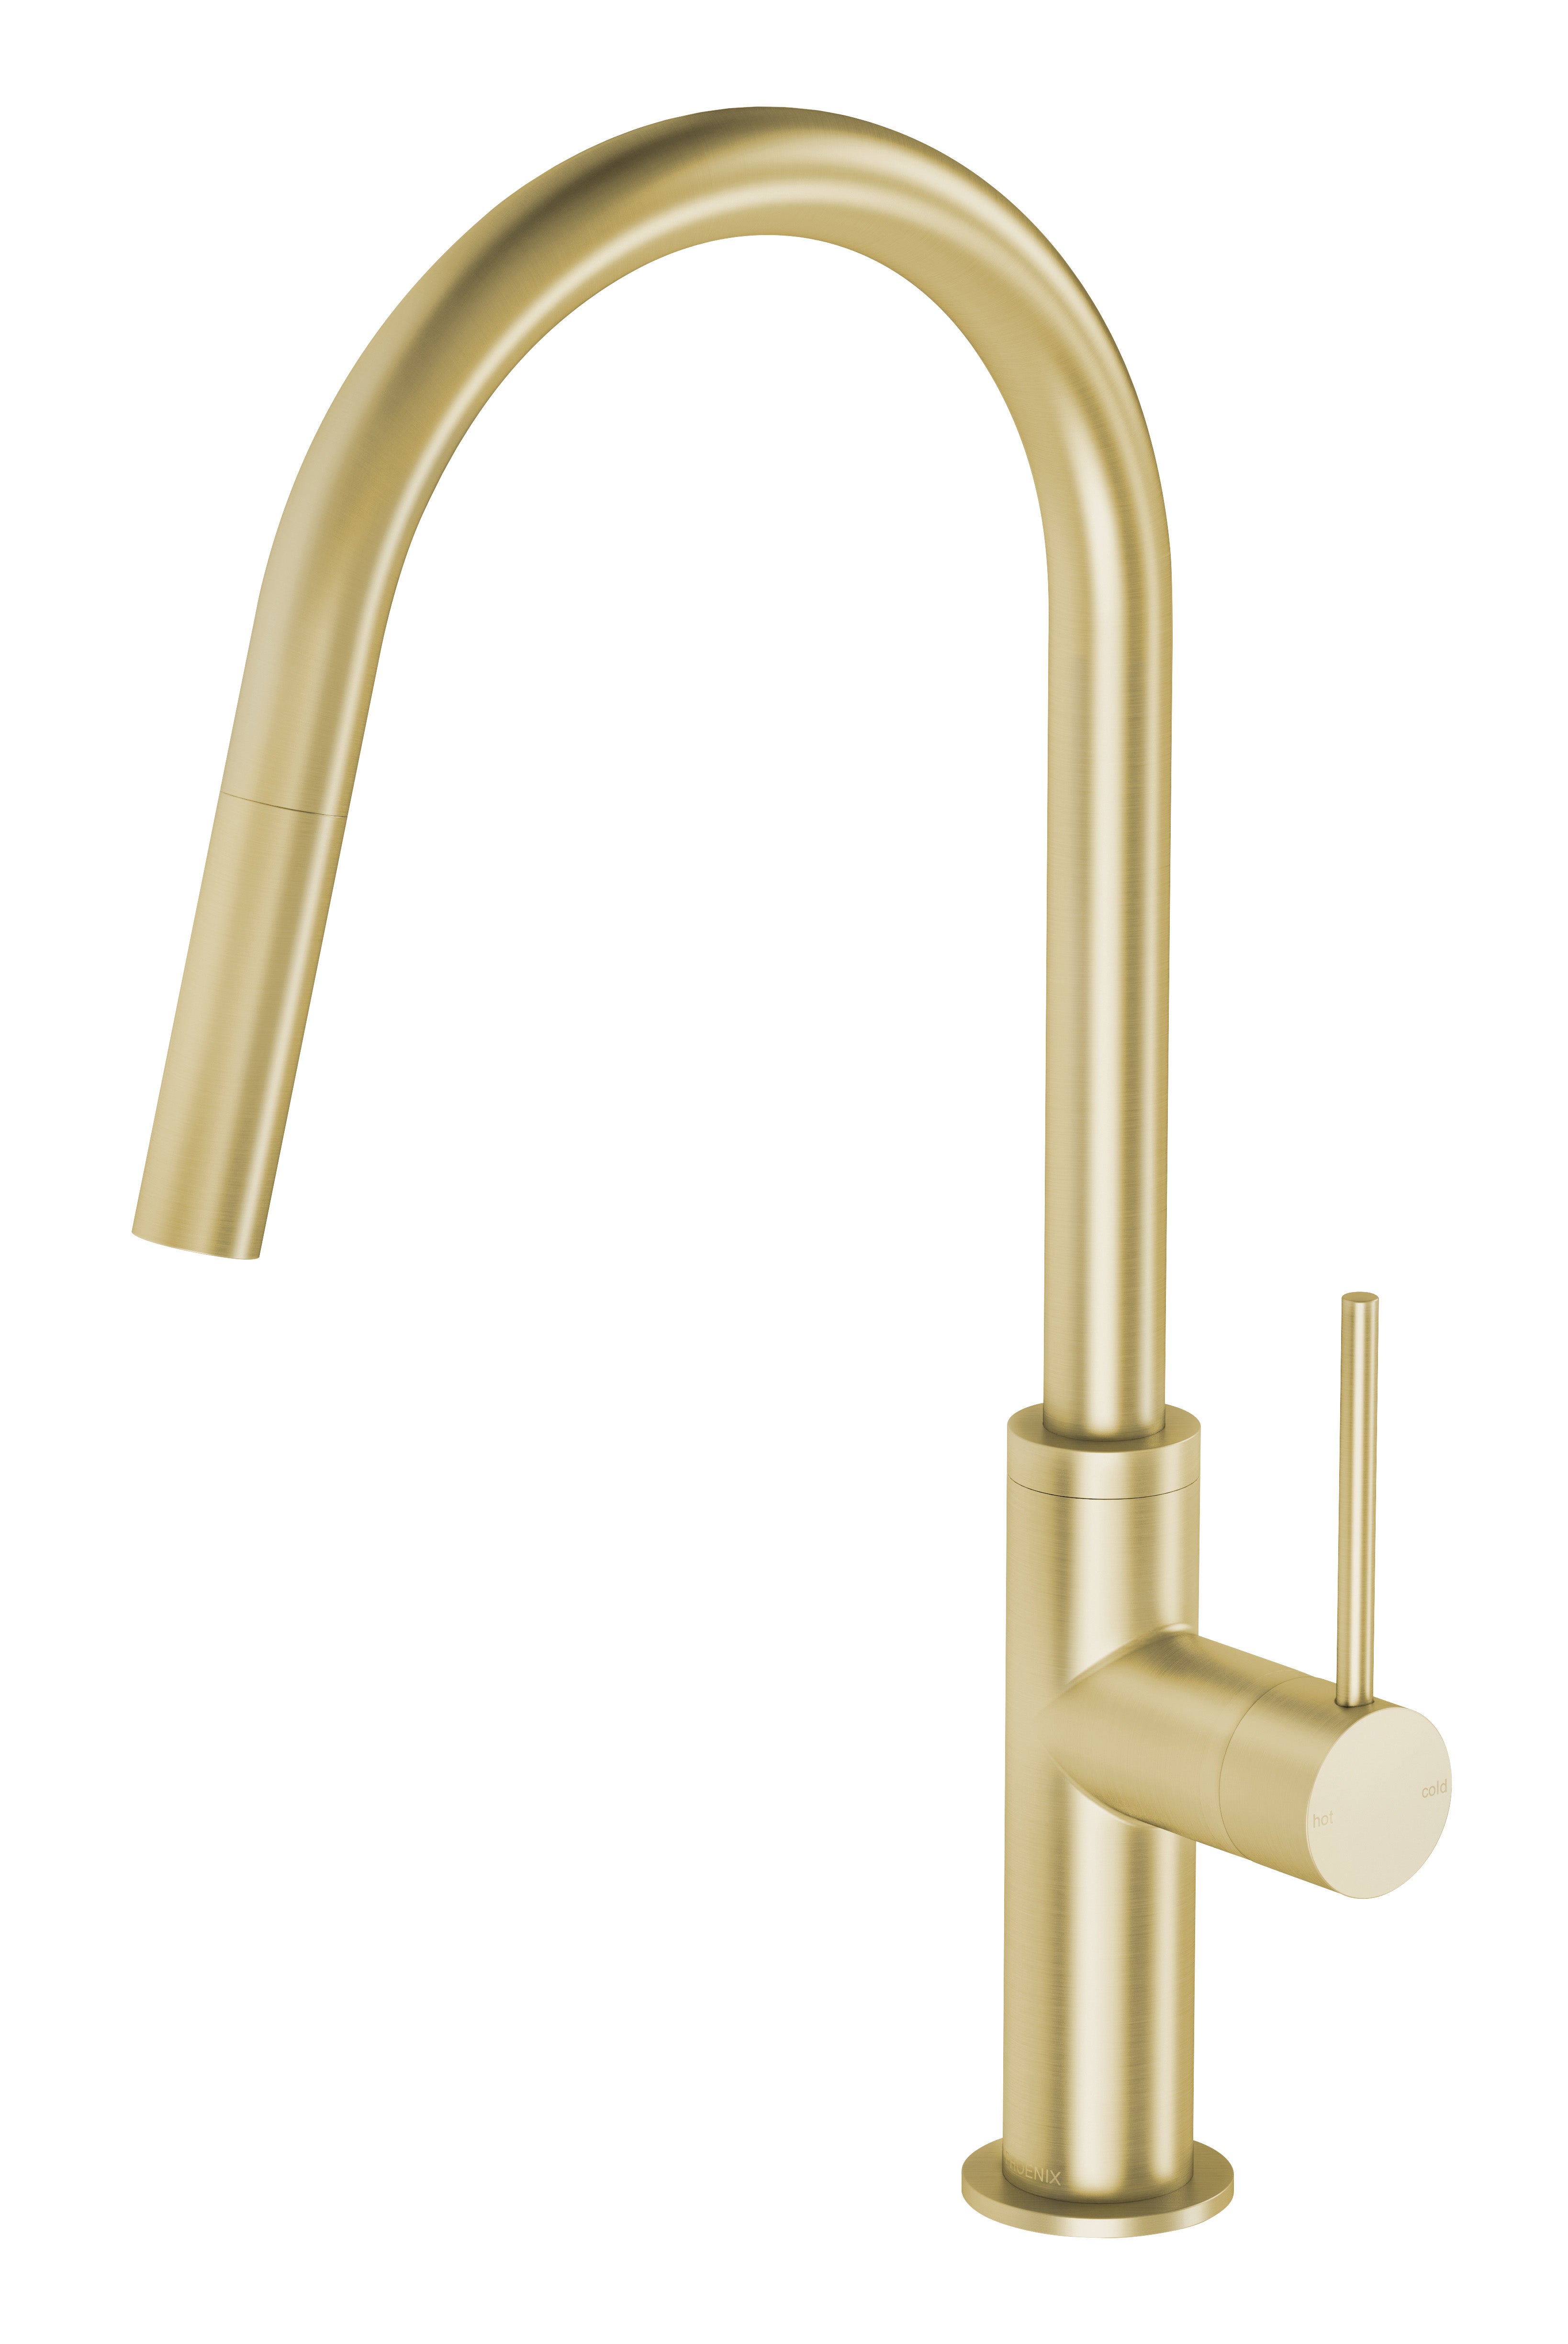 PHOENIX VIVID SLIMLINE PULL OUT SINK MIXER BRUSHED GOLD